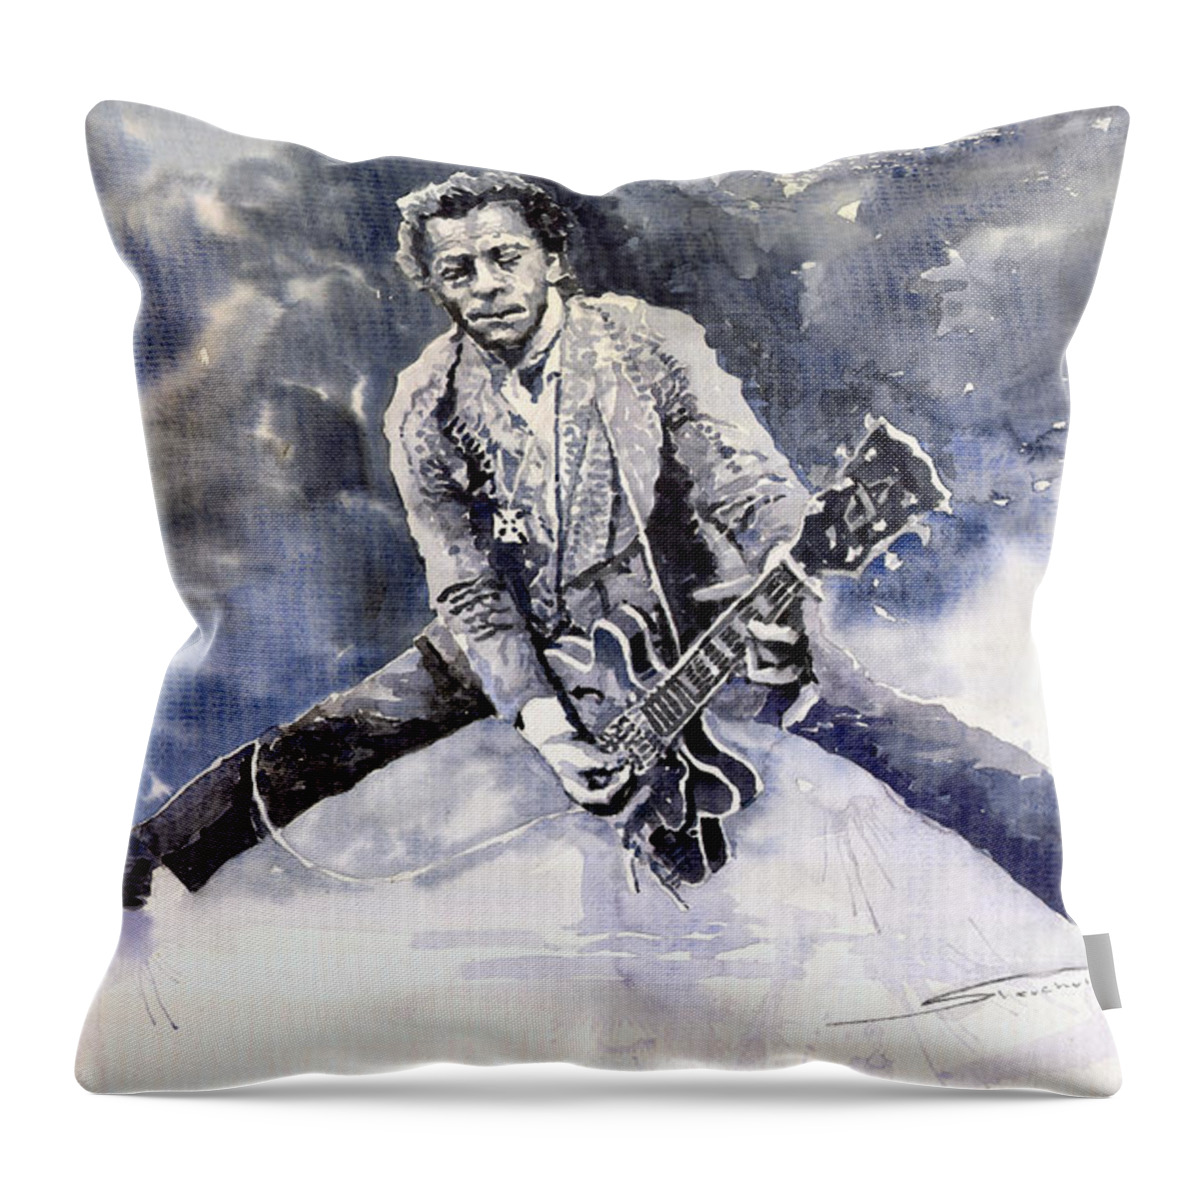 Watercolour Throw Pillow featuring the painting Rock and Roll Music Chuk Berry by Yuriy Shevchuk